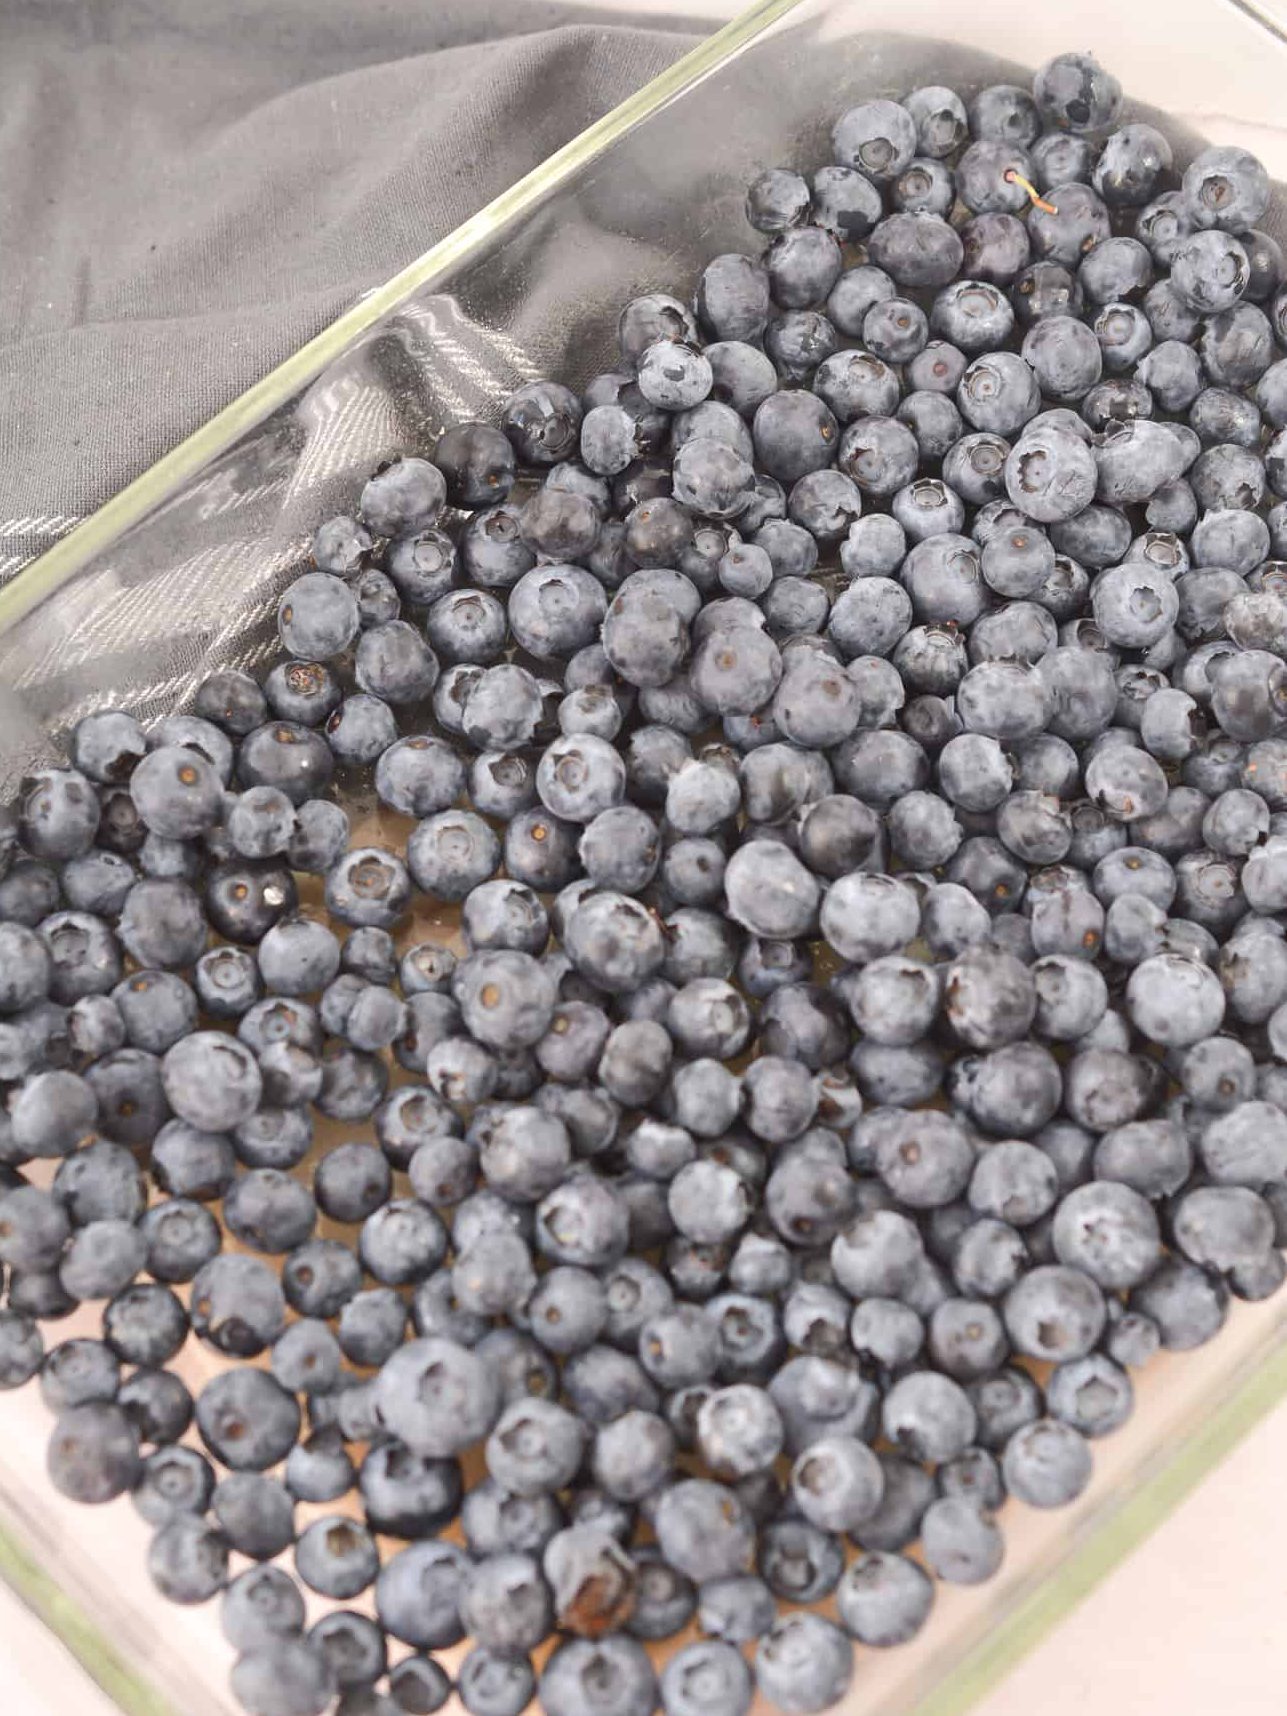 Layer the blueberries in the bottom of a well-greased 9x13 baking dish.